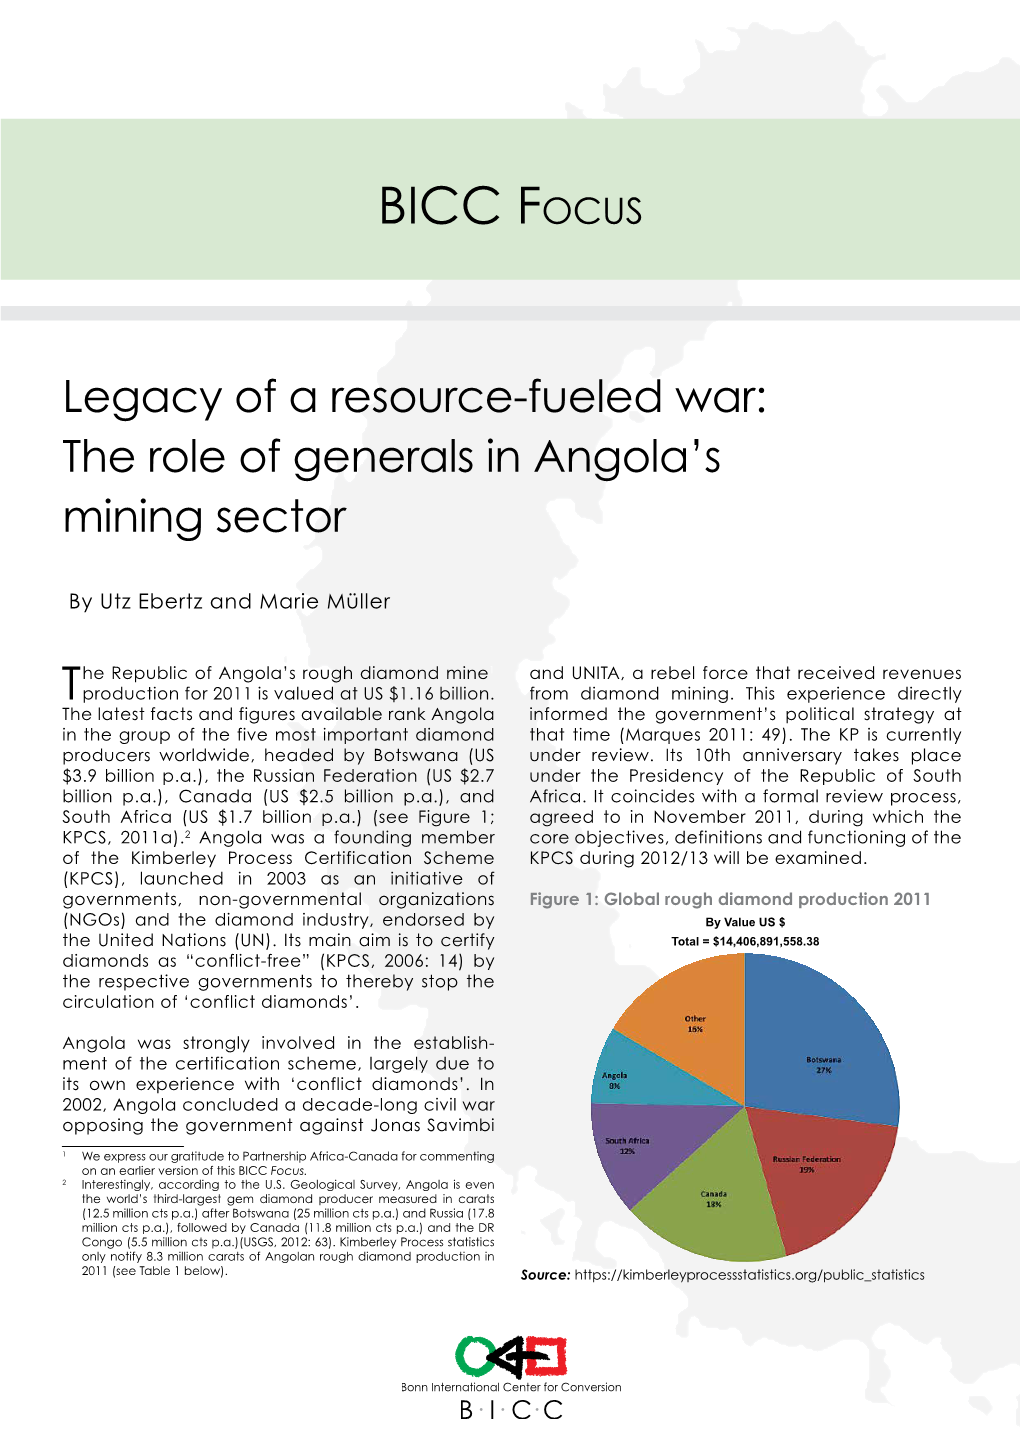 Legacy of a Resource-Fueled War: the Role of Generals in Angola's Mining Sector